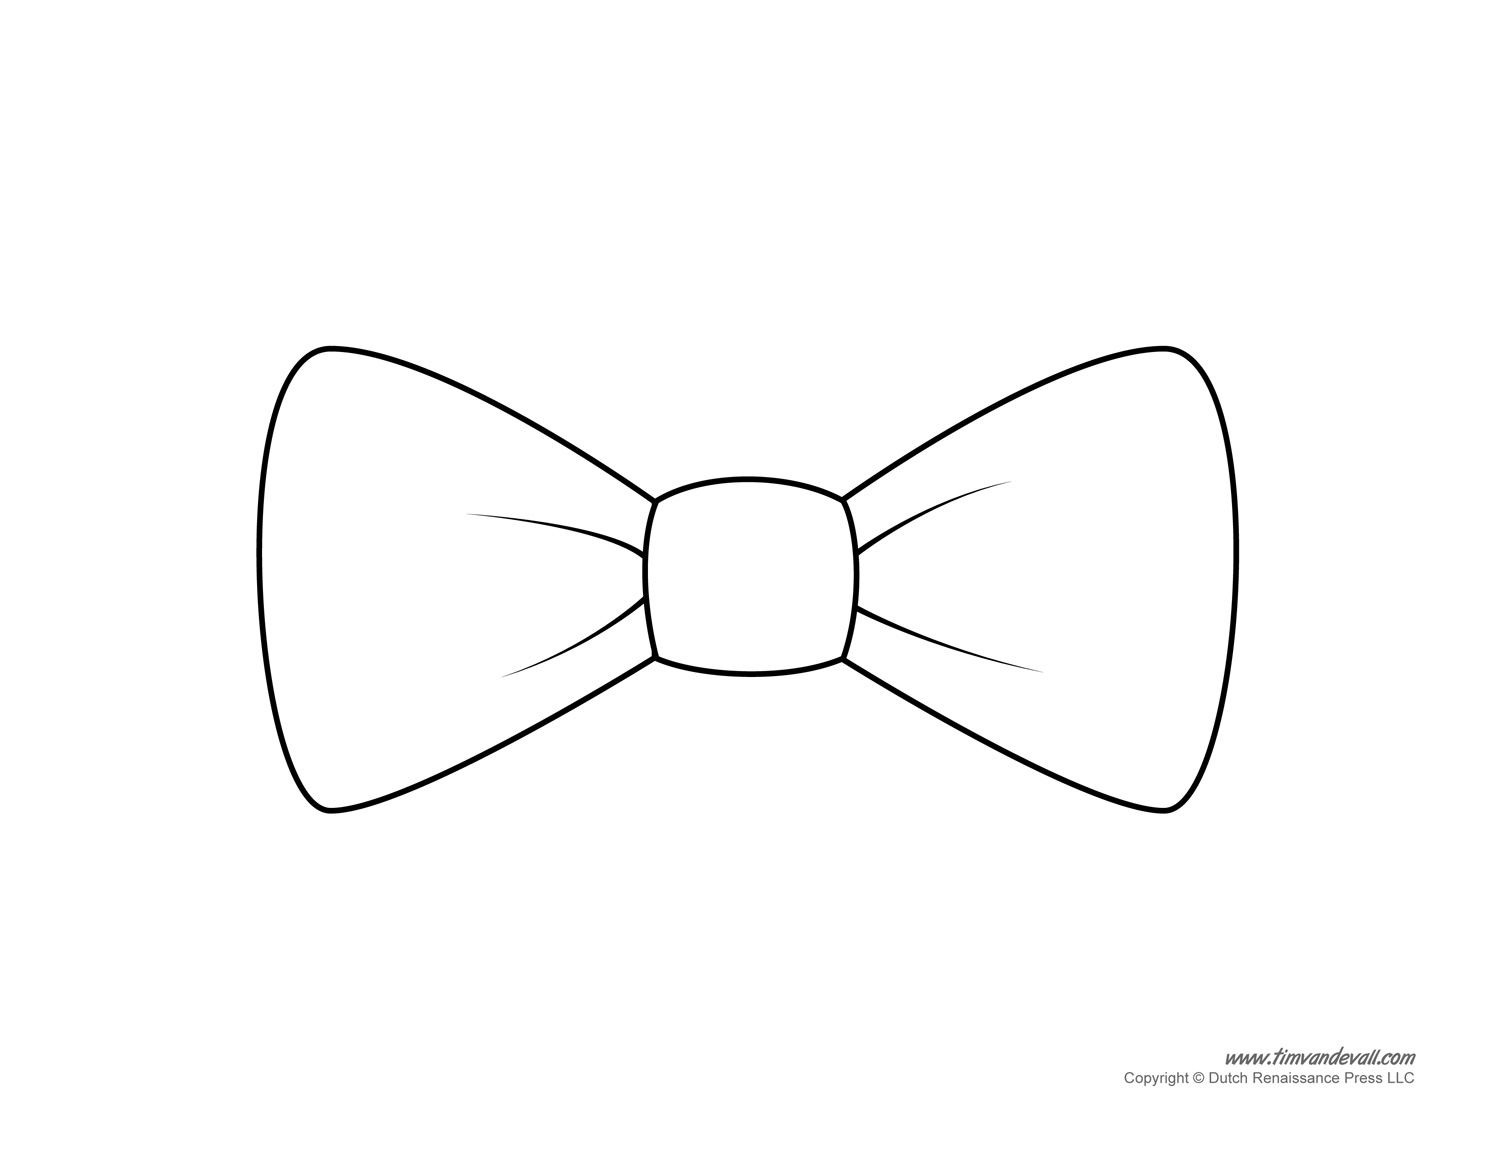 free-bow-tie-clipart-black-and-white-download-free-bow-tie-clipart